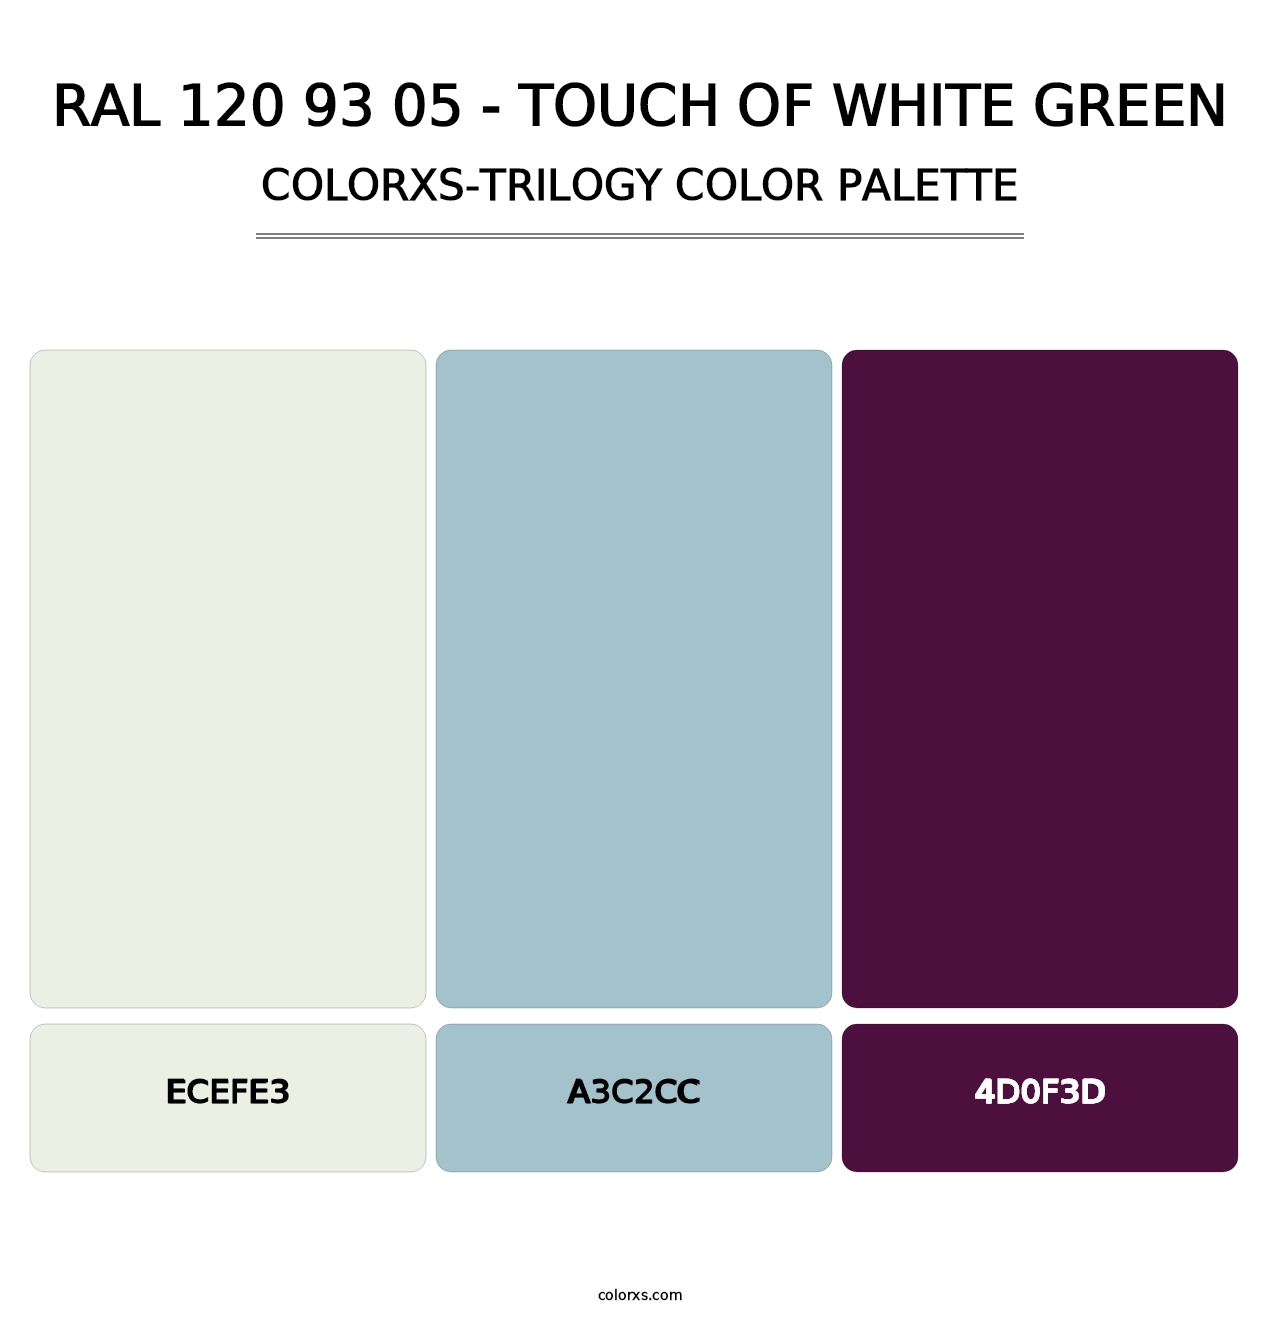 RAL 120 93 05 - Touch Of White Green - Colorxs Trilogy Palette